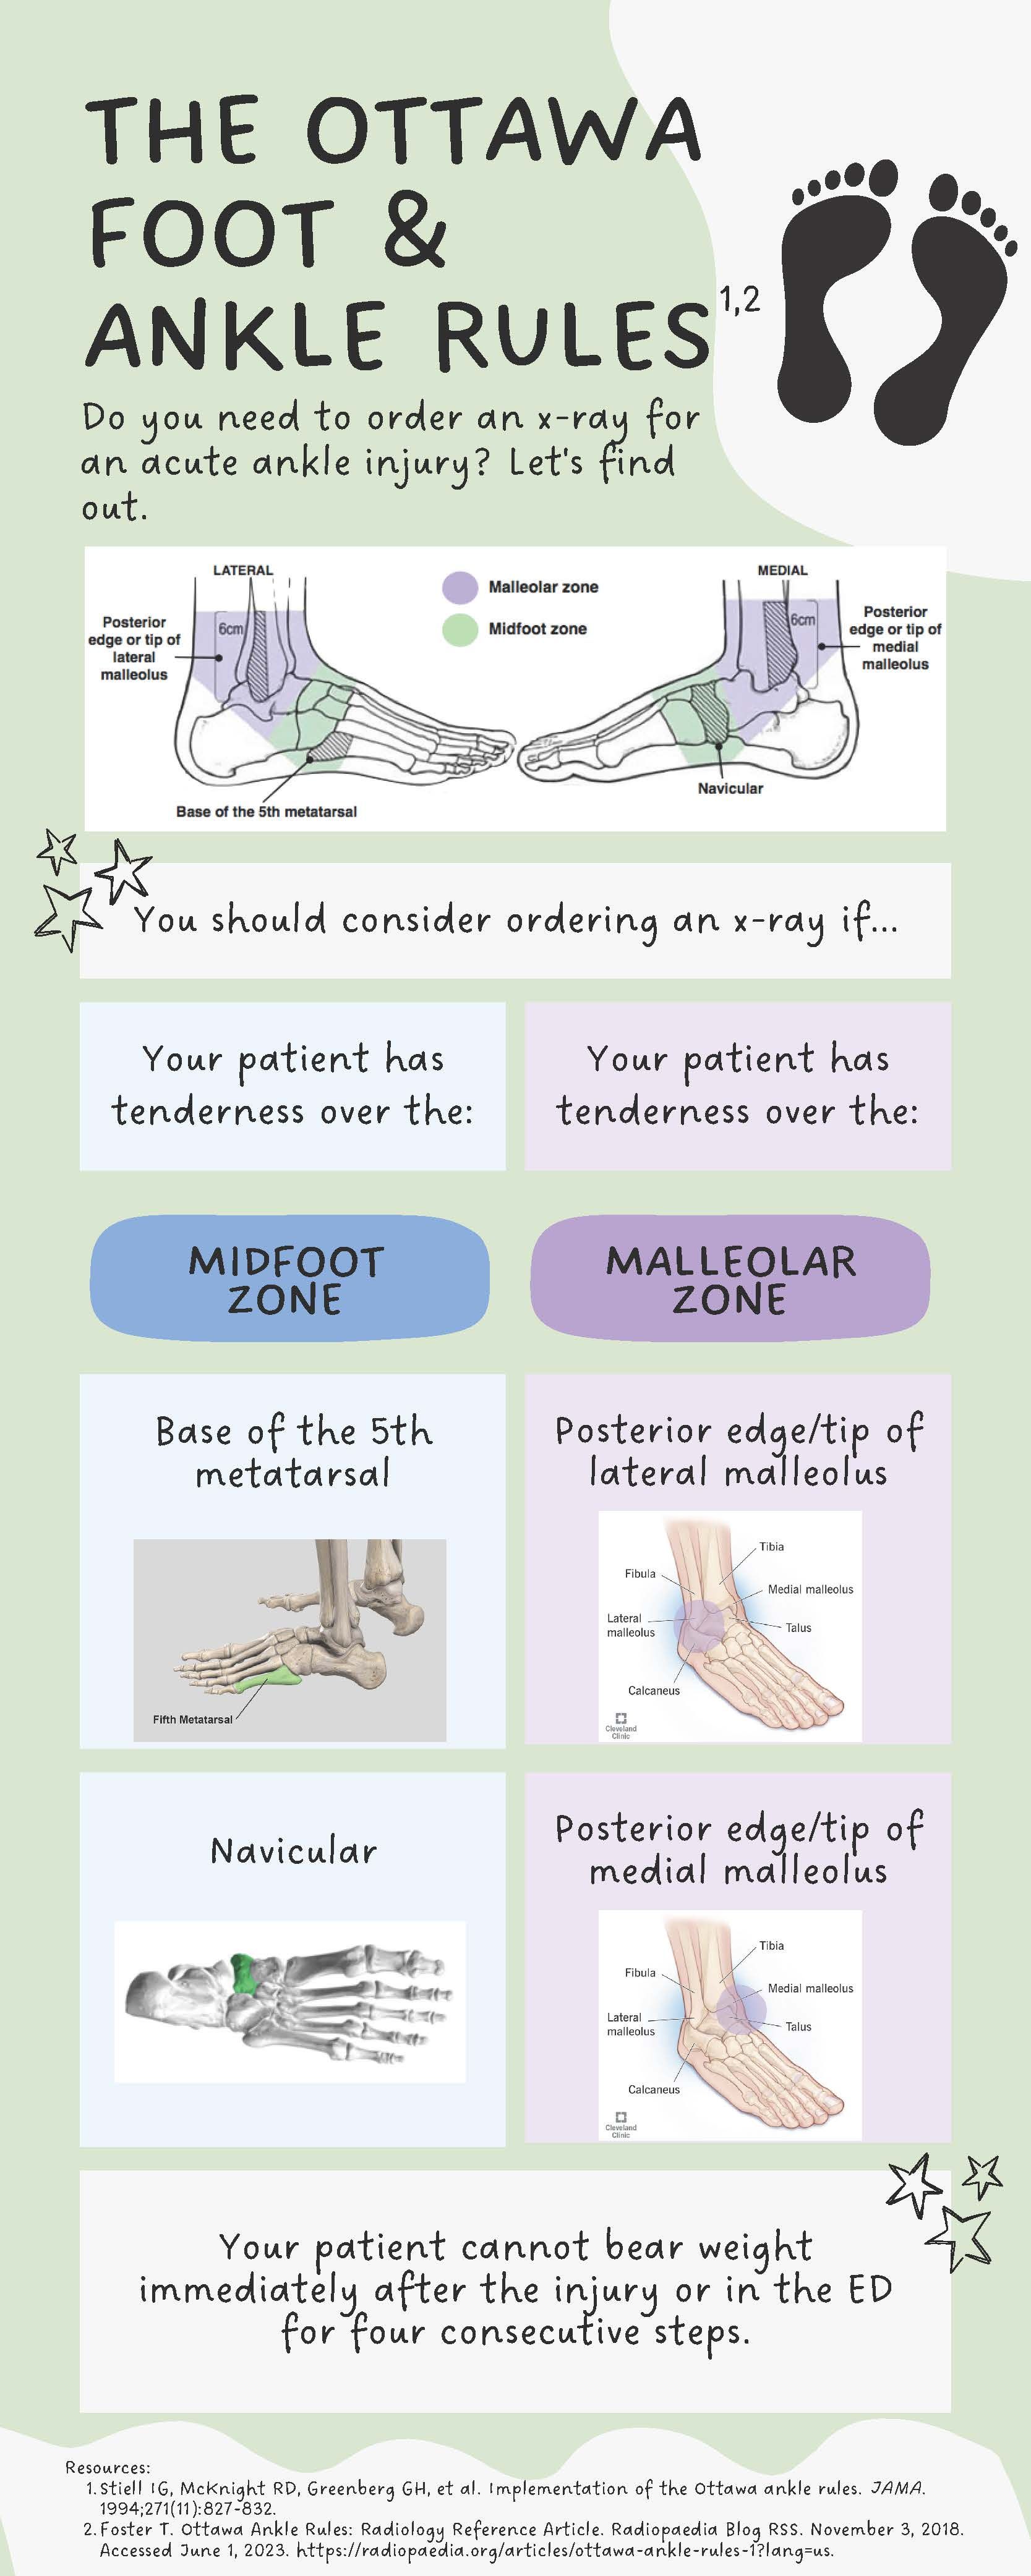 The Ottawa Foot and Ankle Rules